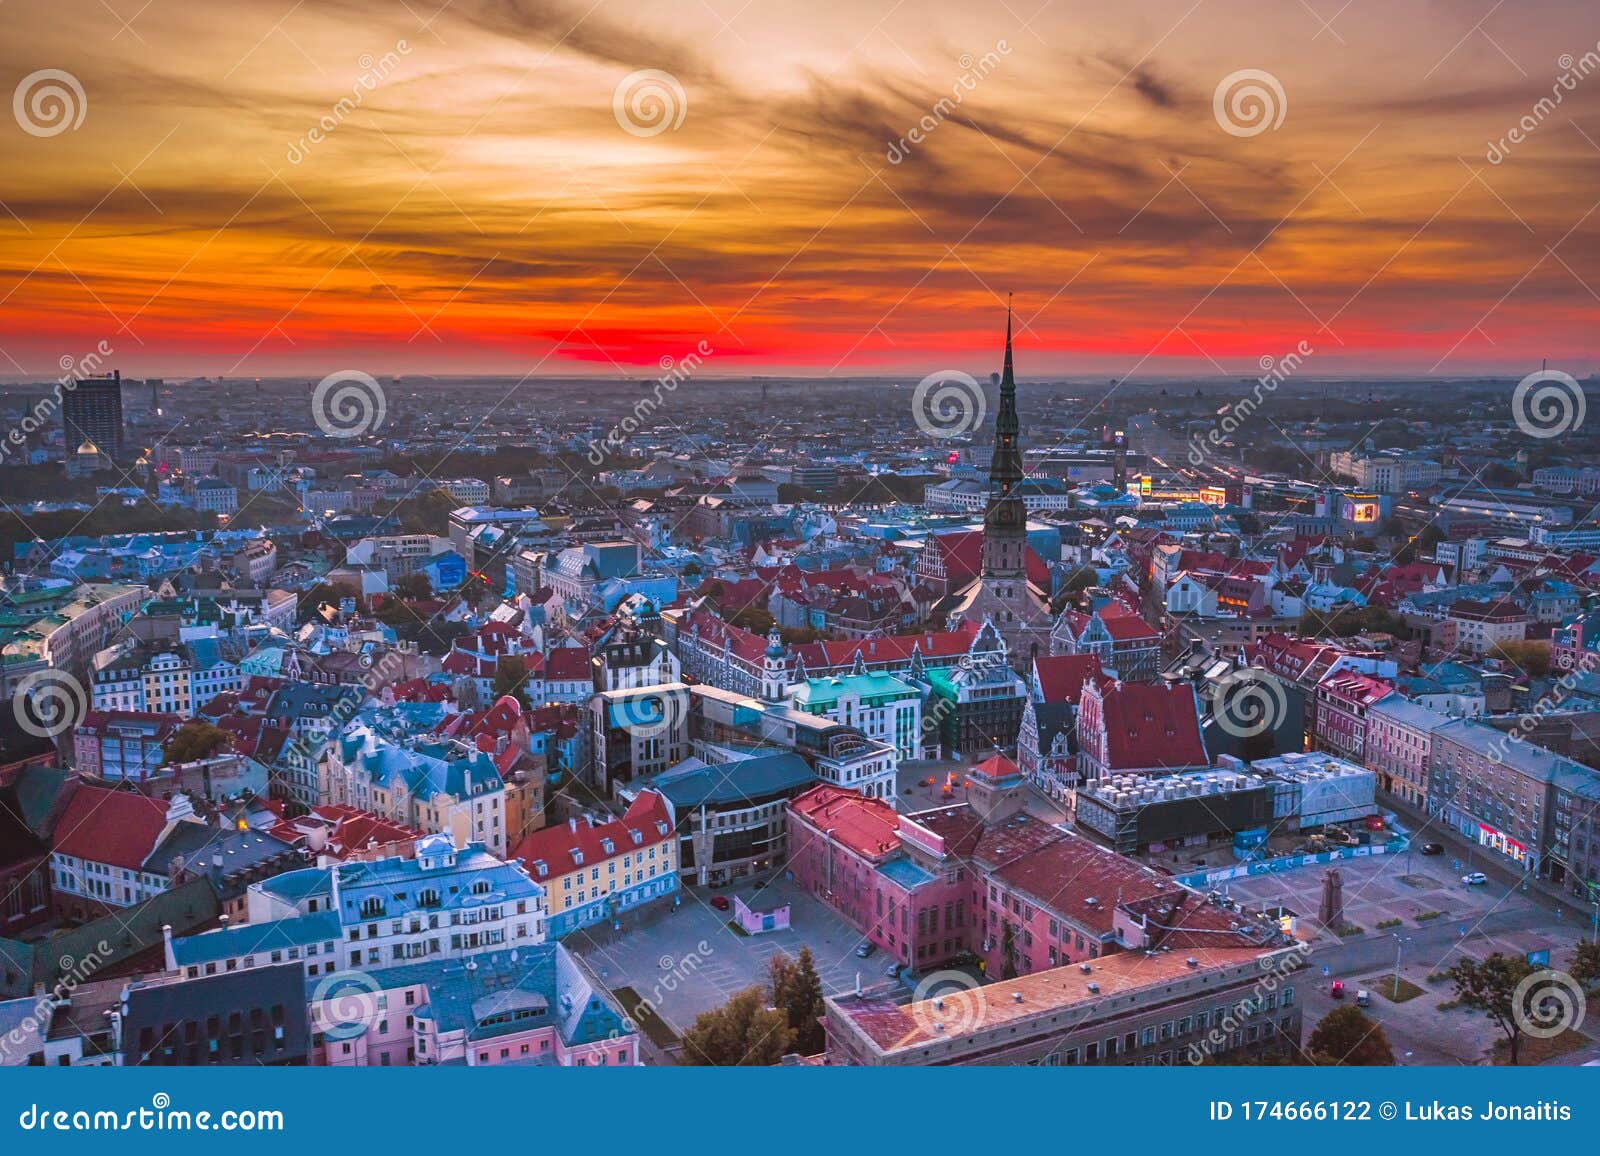 Skyline of Riga old town, sunrise time. Riga is the capital and the largest city of Latvia. Skyline of Riga old town, sunrise time. Riga is the capital of Latvia